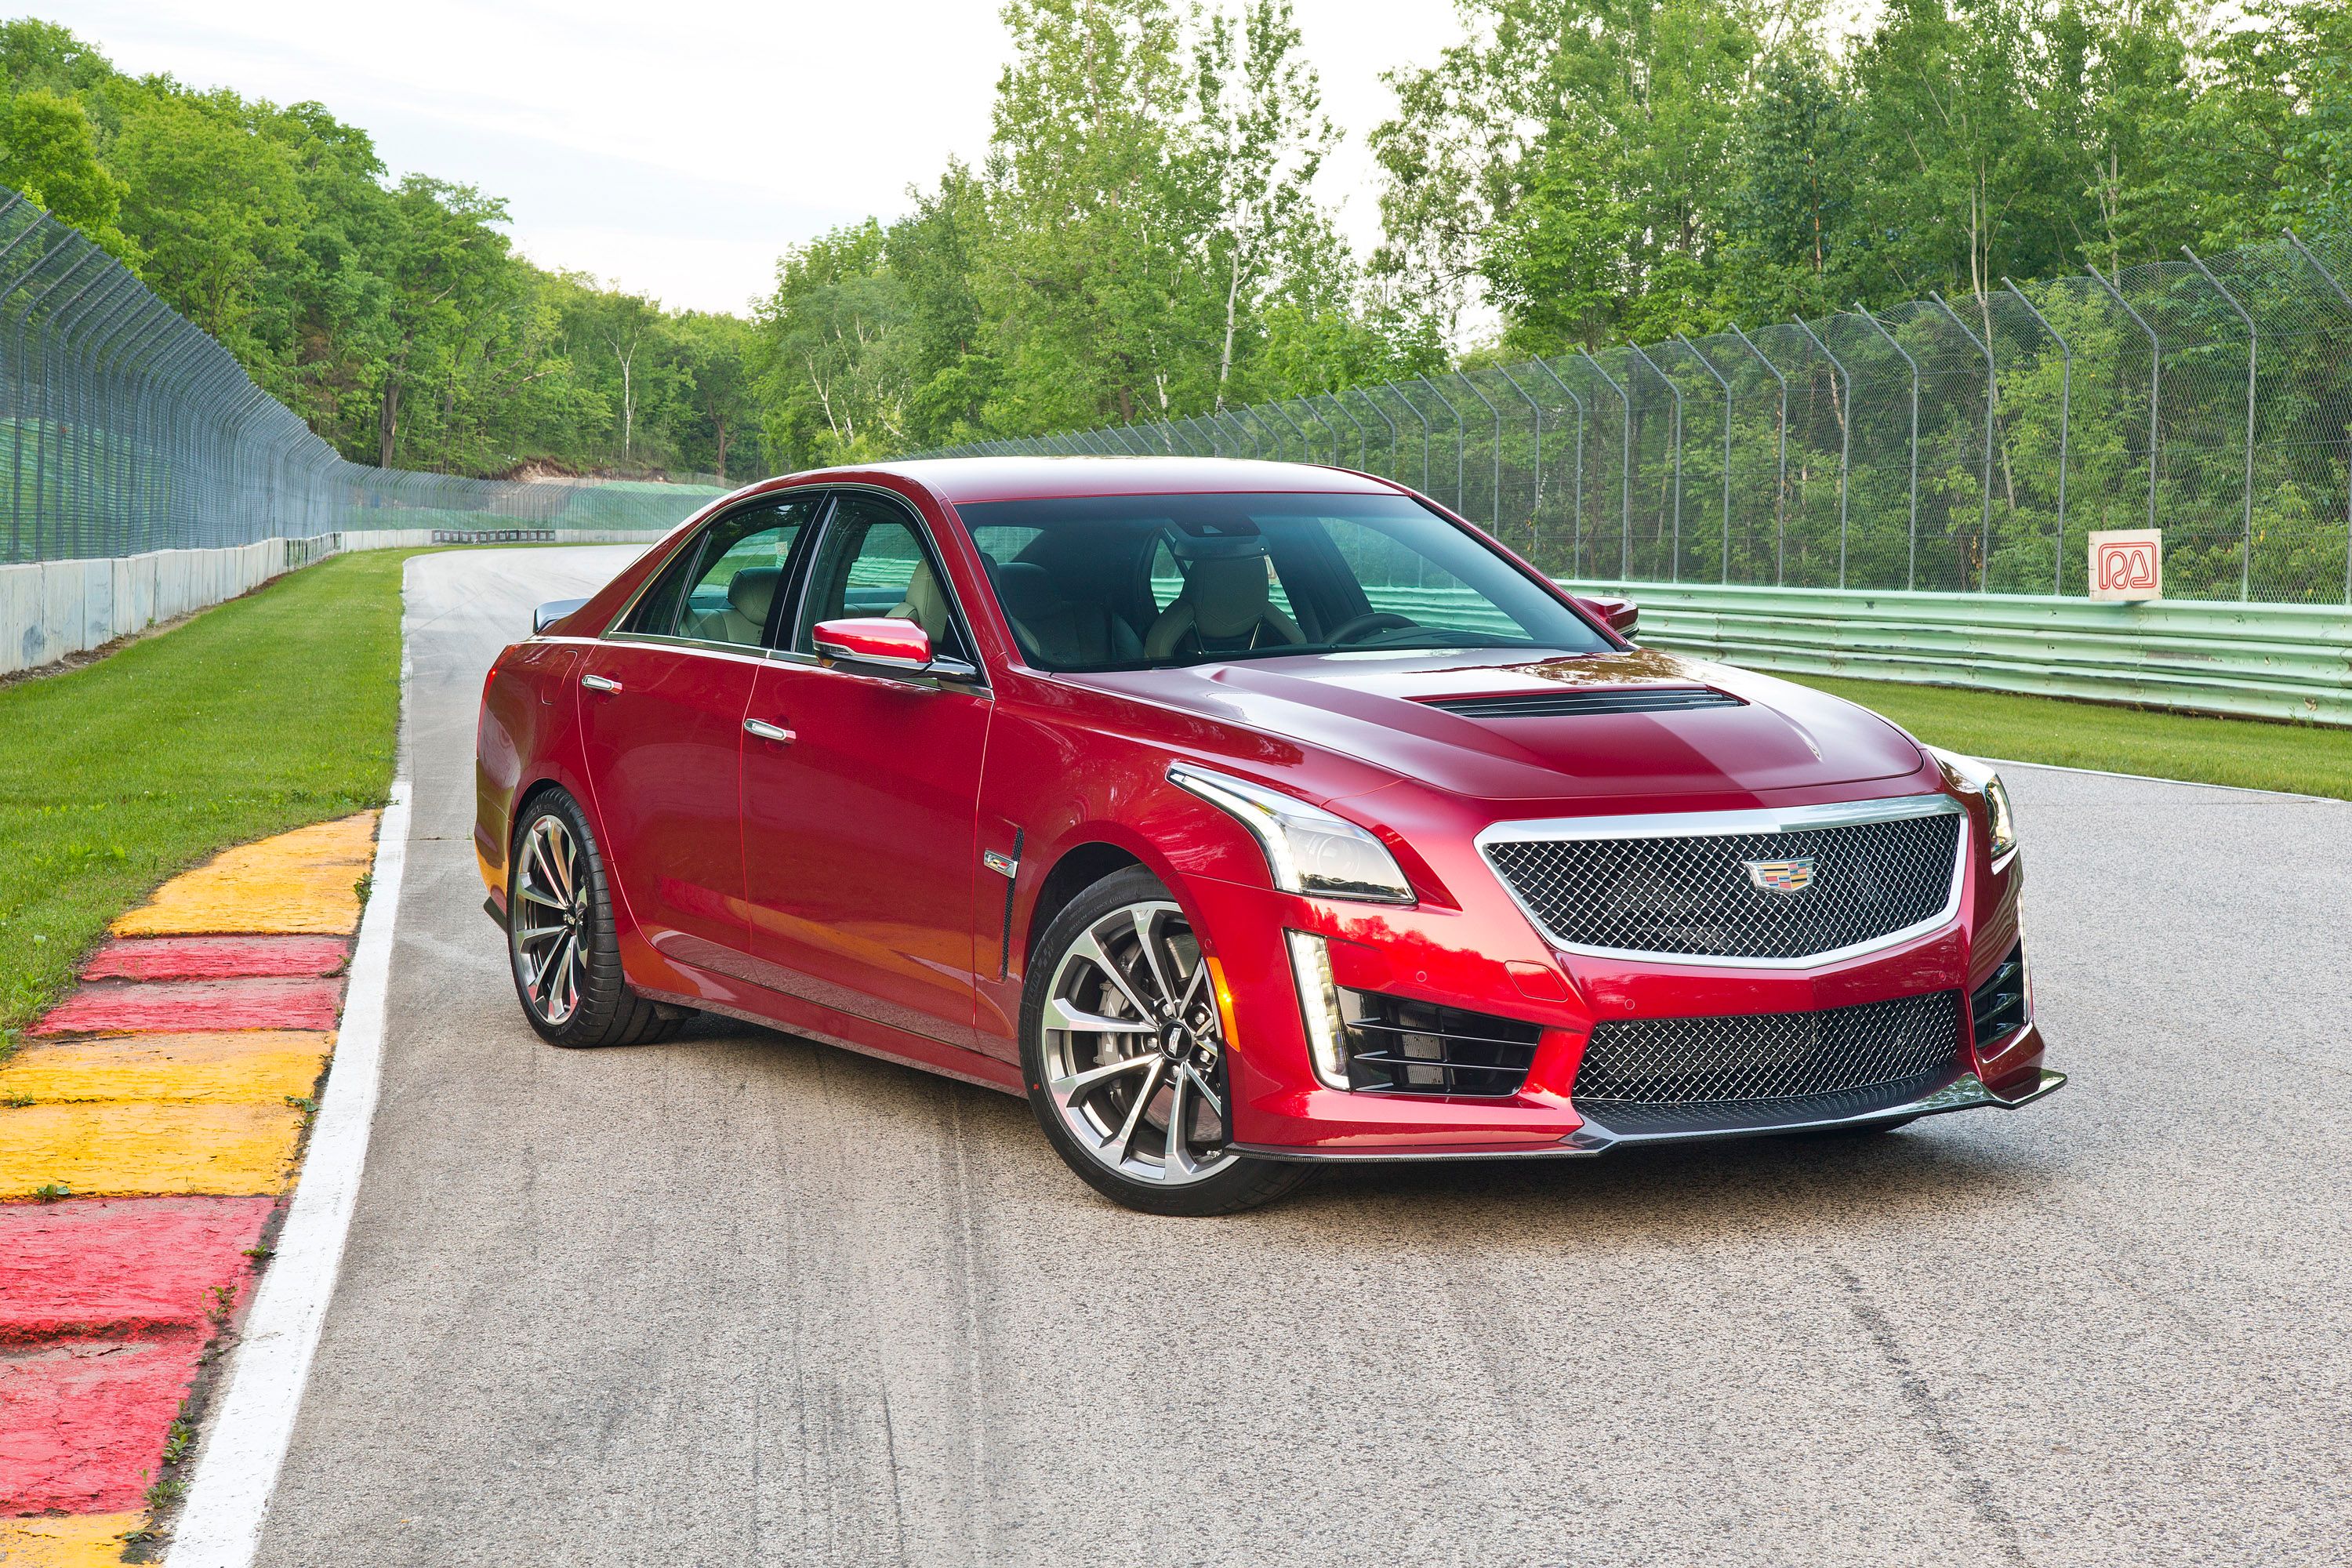 Red Cadillac CTS-V parked on track.